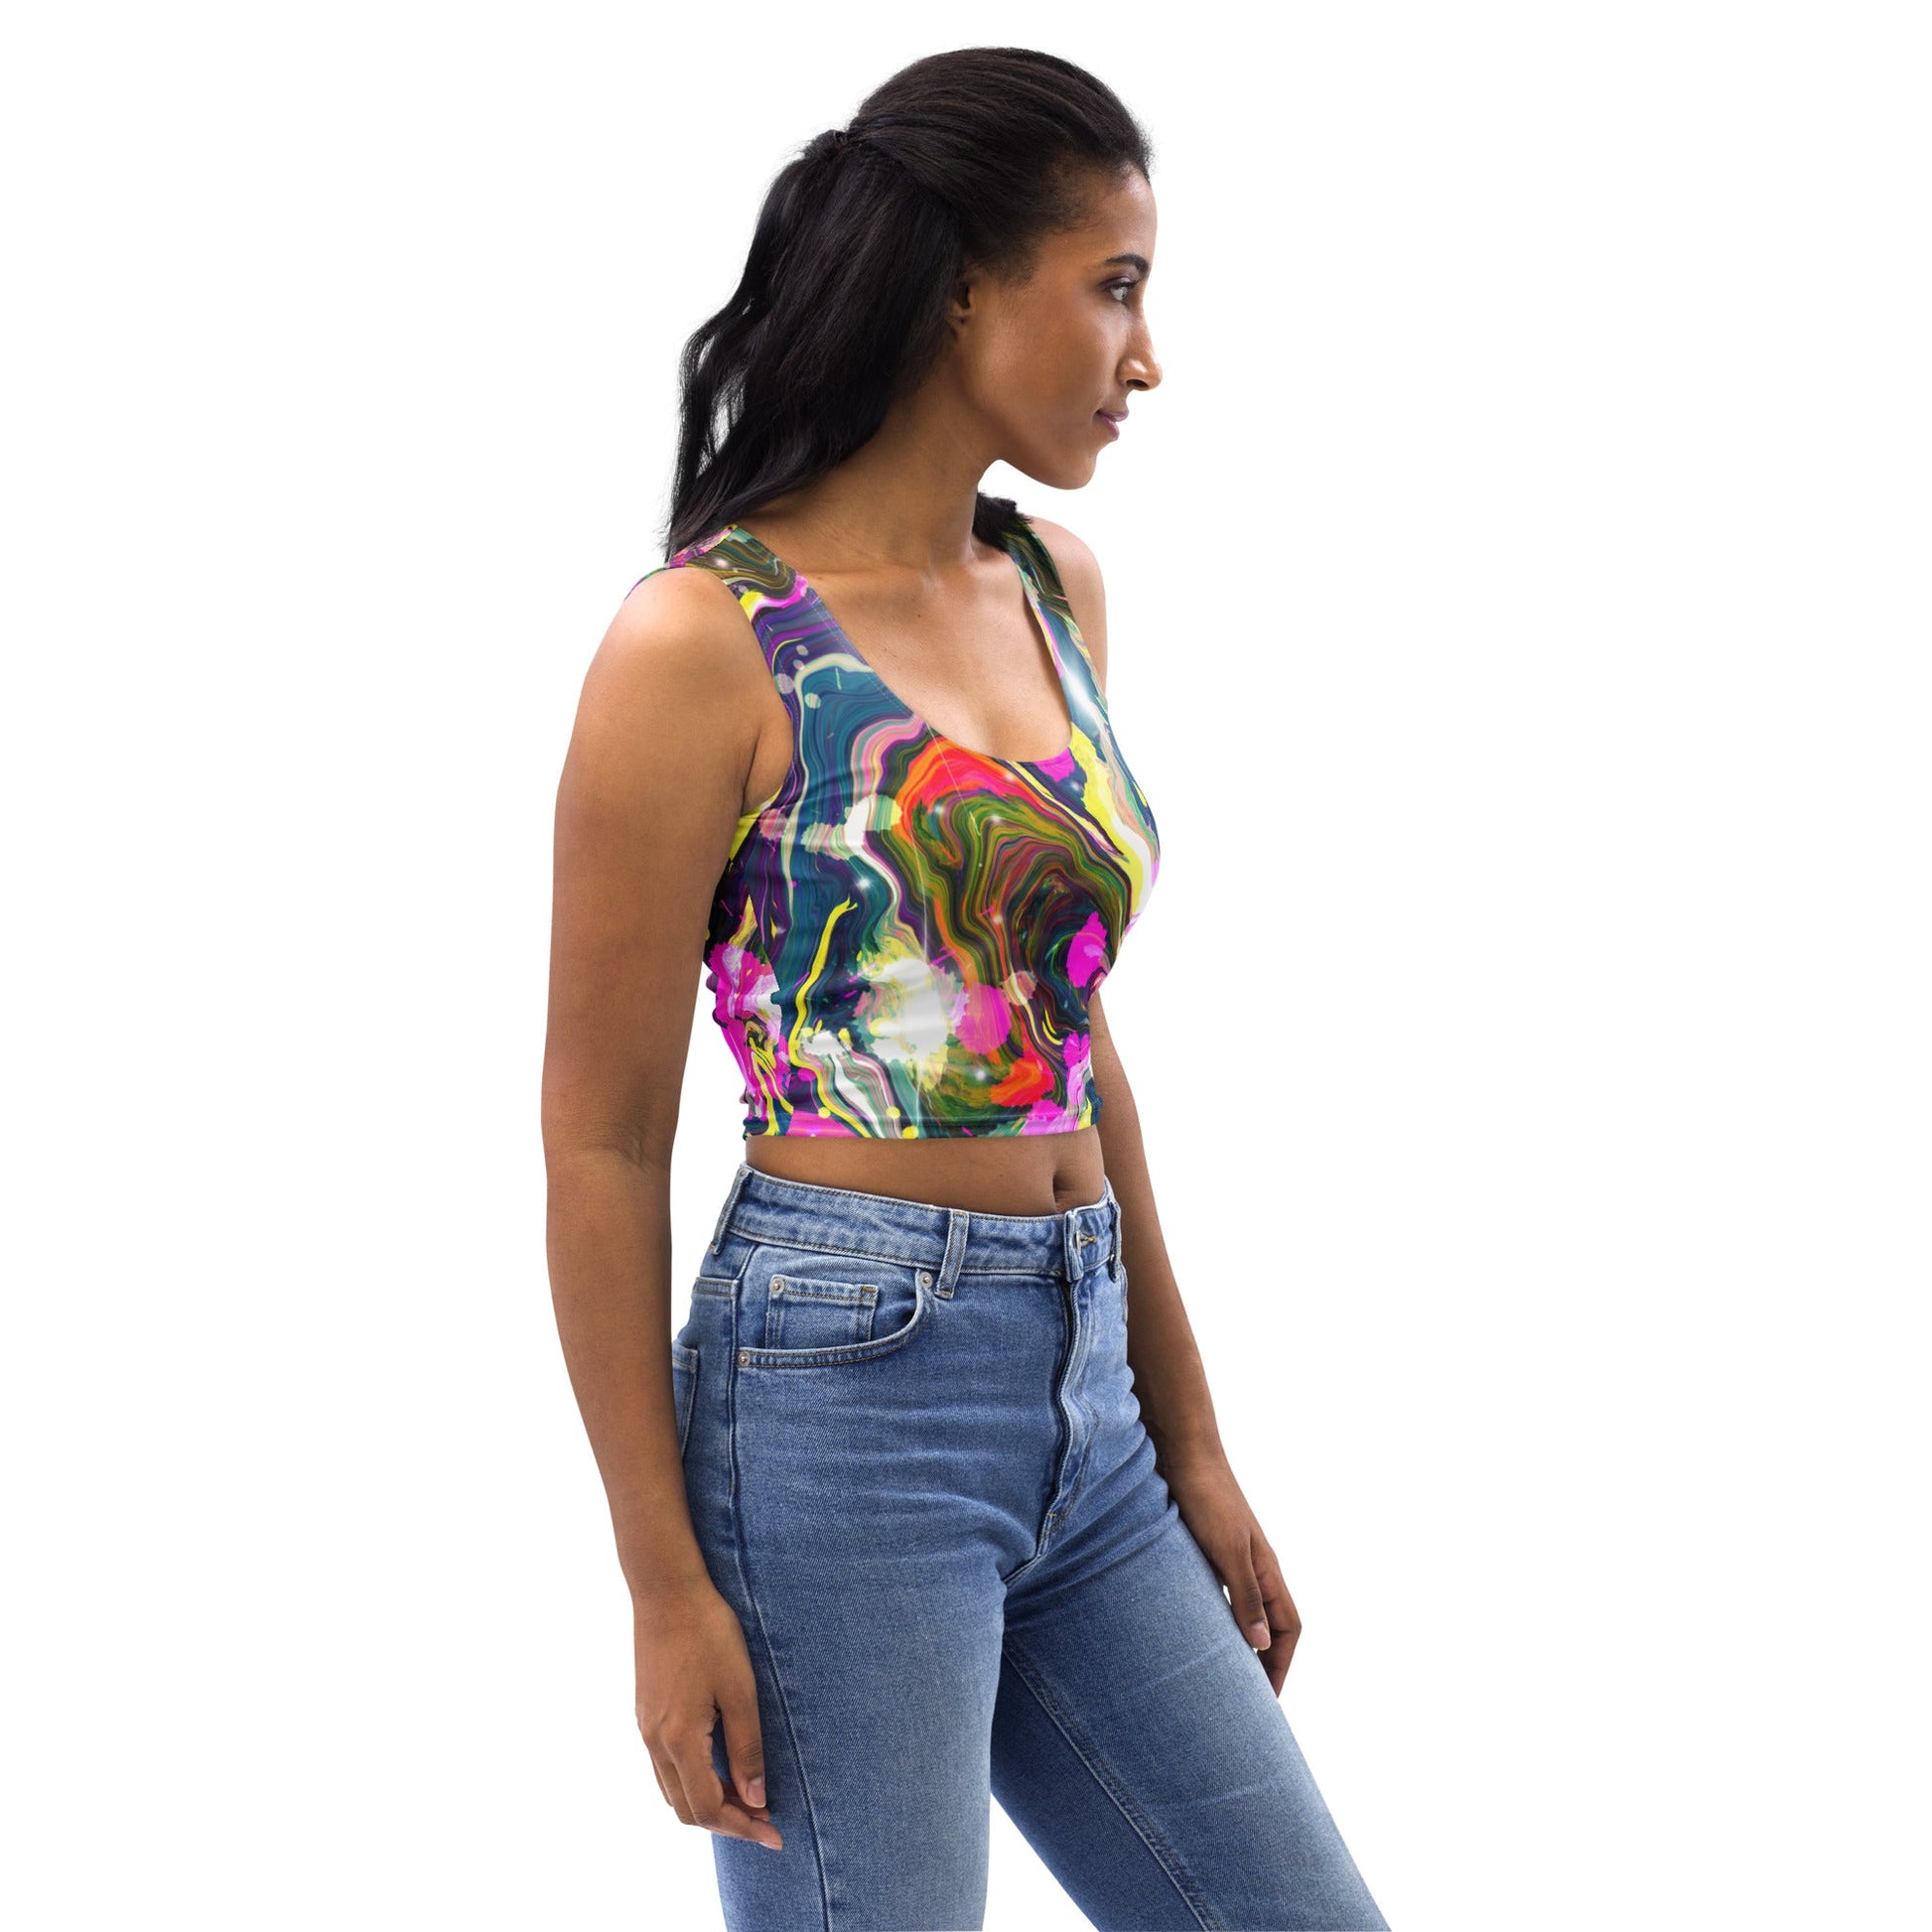 ABSTRACT All-Over Printed Crop Top - Bonotee